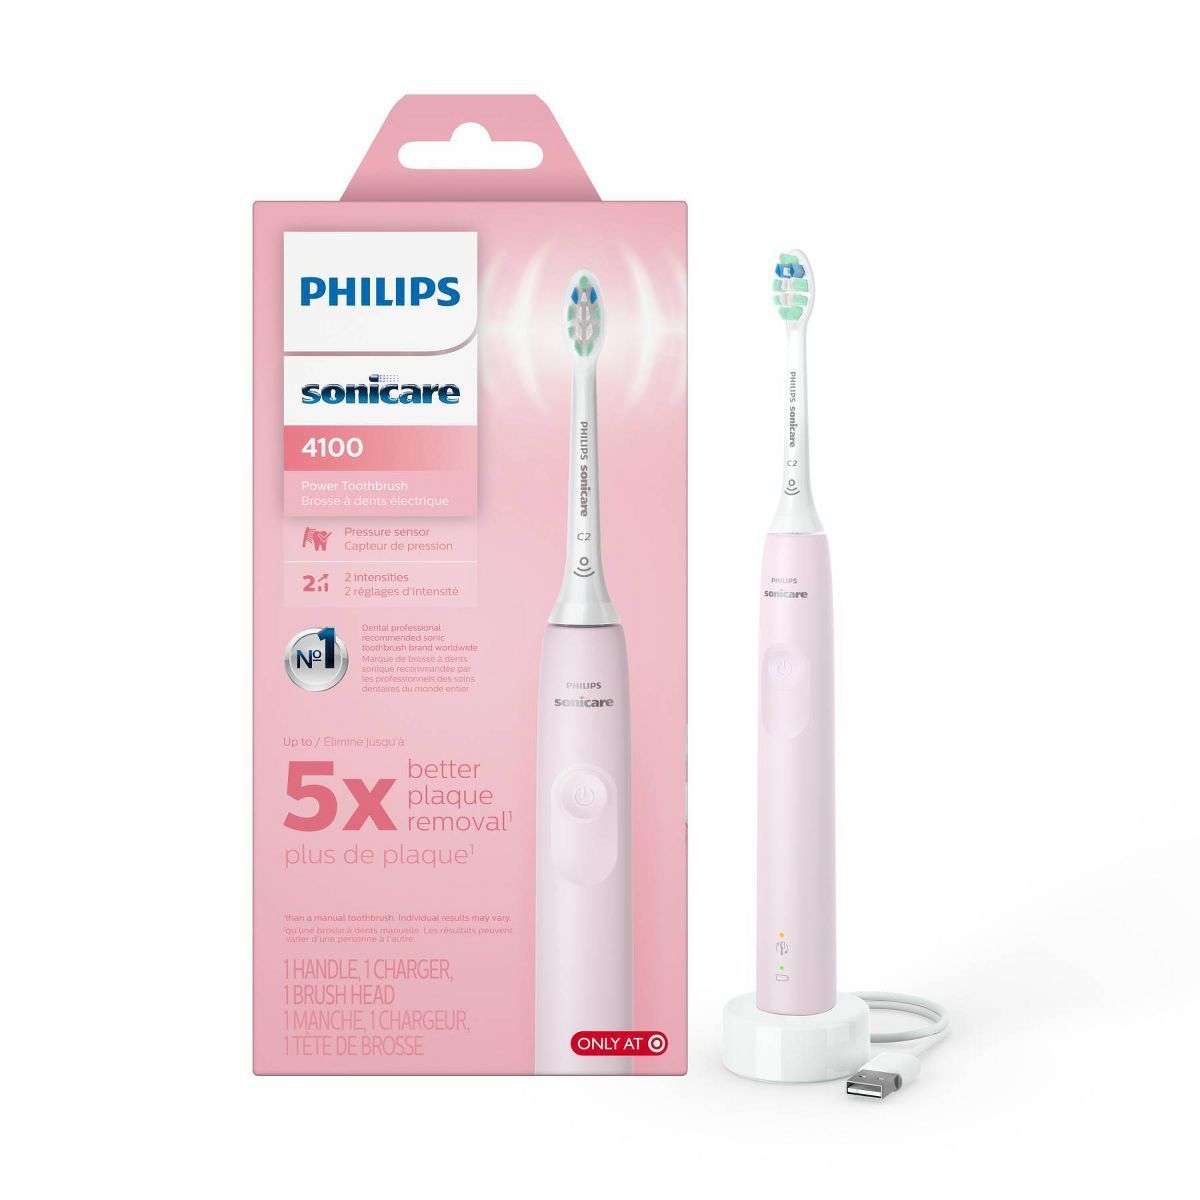 Philips Sonicare 4100 Plaque Control Rechargeable Electric Toothbrush - HX3681/21 - Sugar Rose | Target